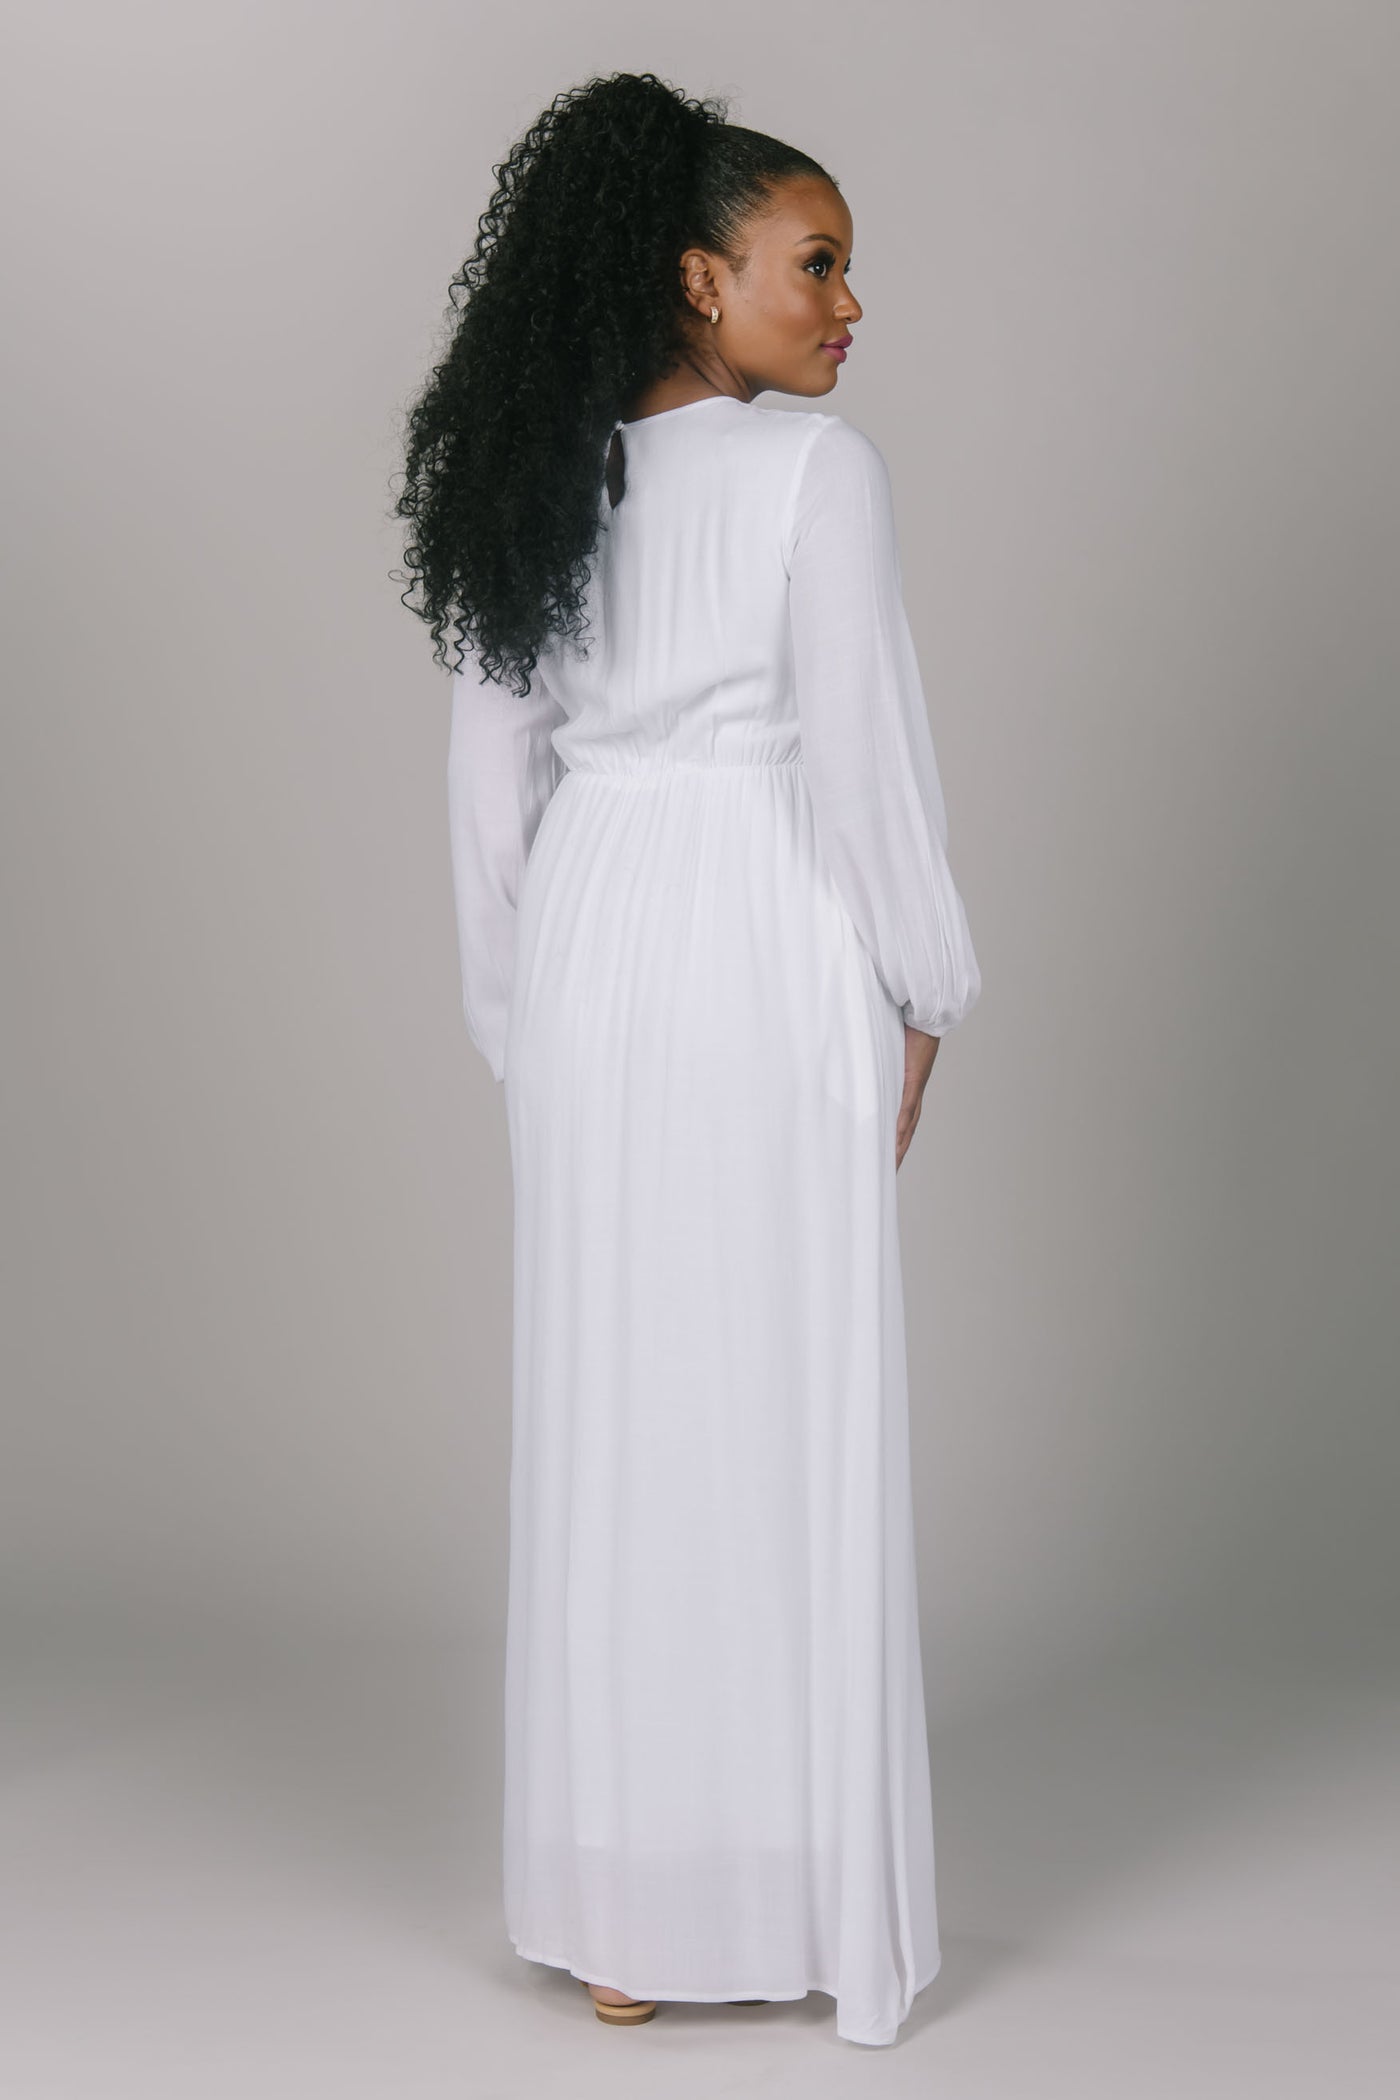 Back view of temple dress with a little bit of lace. It has vertical strips of lace on the top of the dress. It has a simple skirt and bishop styled sleeves. The high scoop neckline and pockets of this dress make it very efficient.